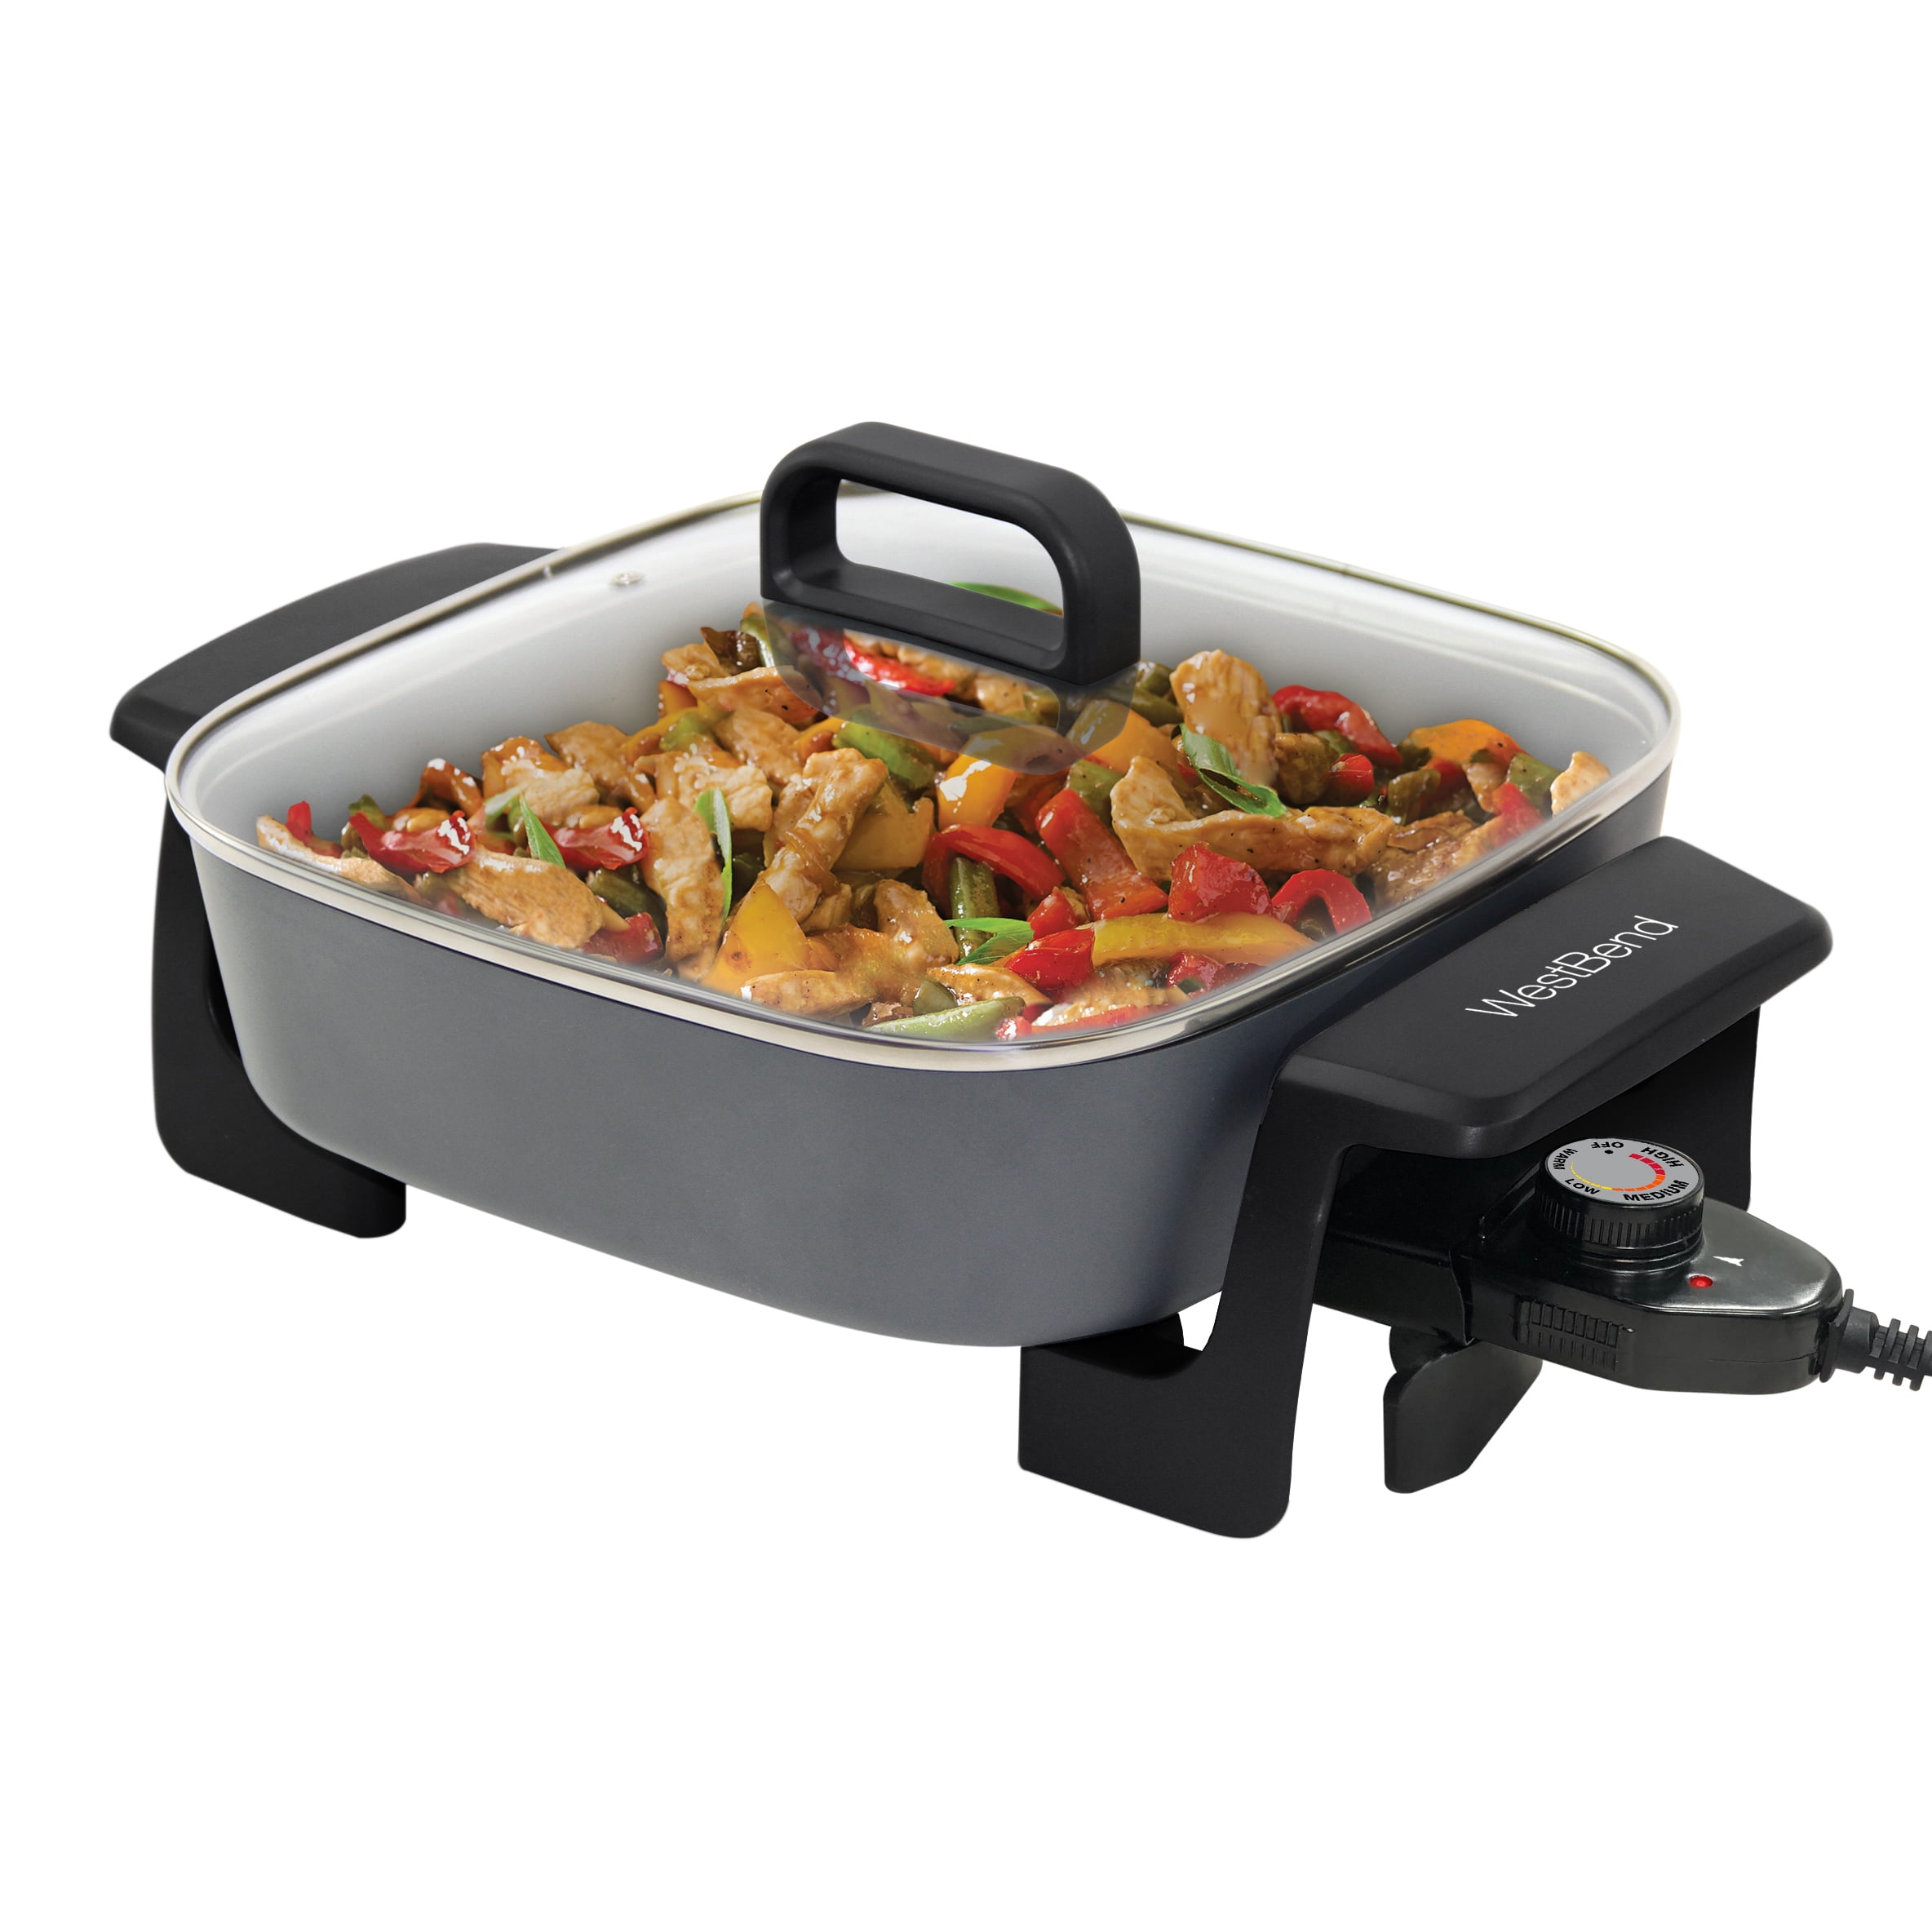 West Bend 12-Inch Electric Skillet with Non-Stick Coating